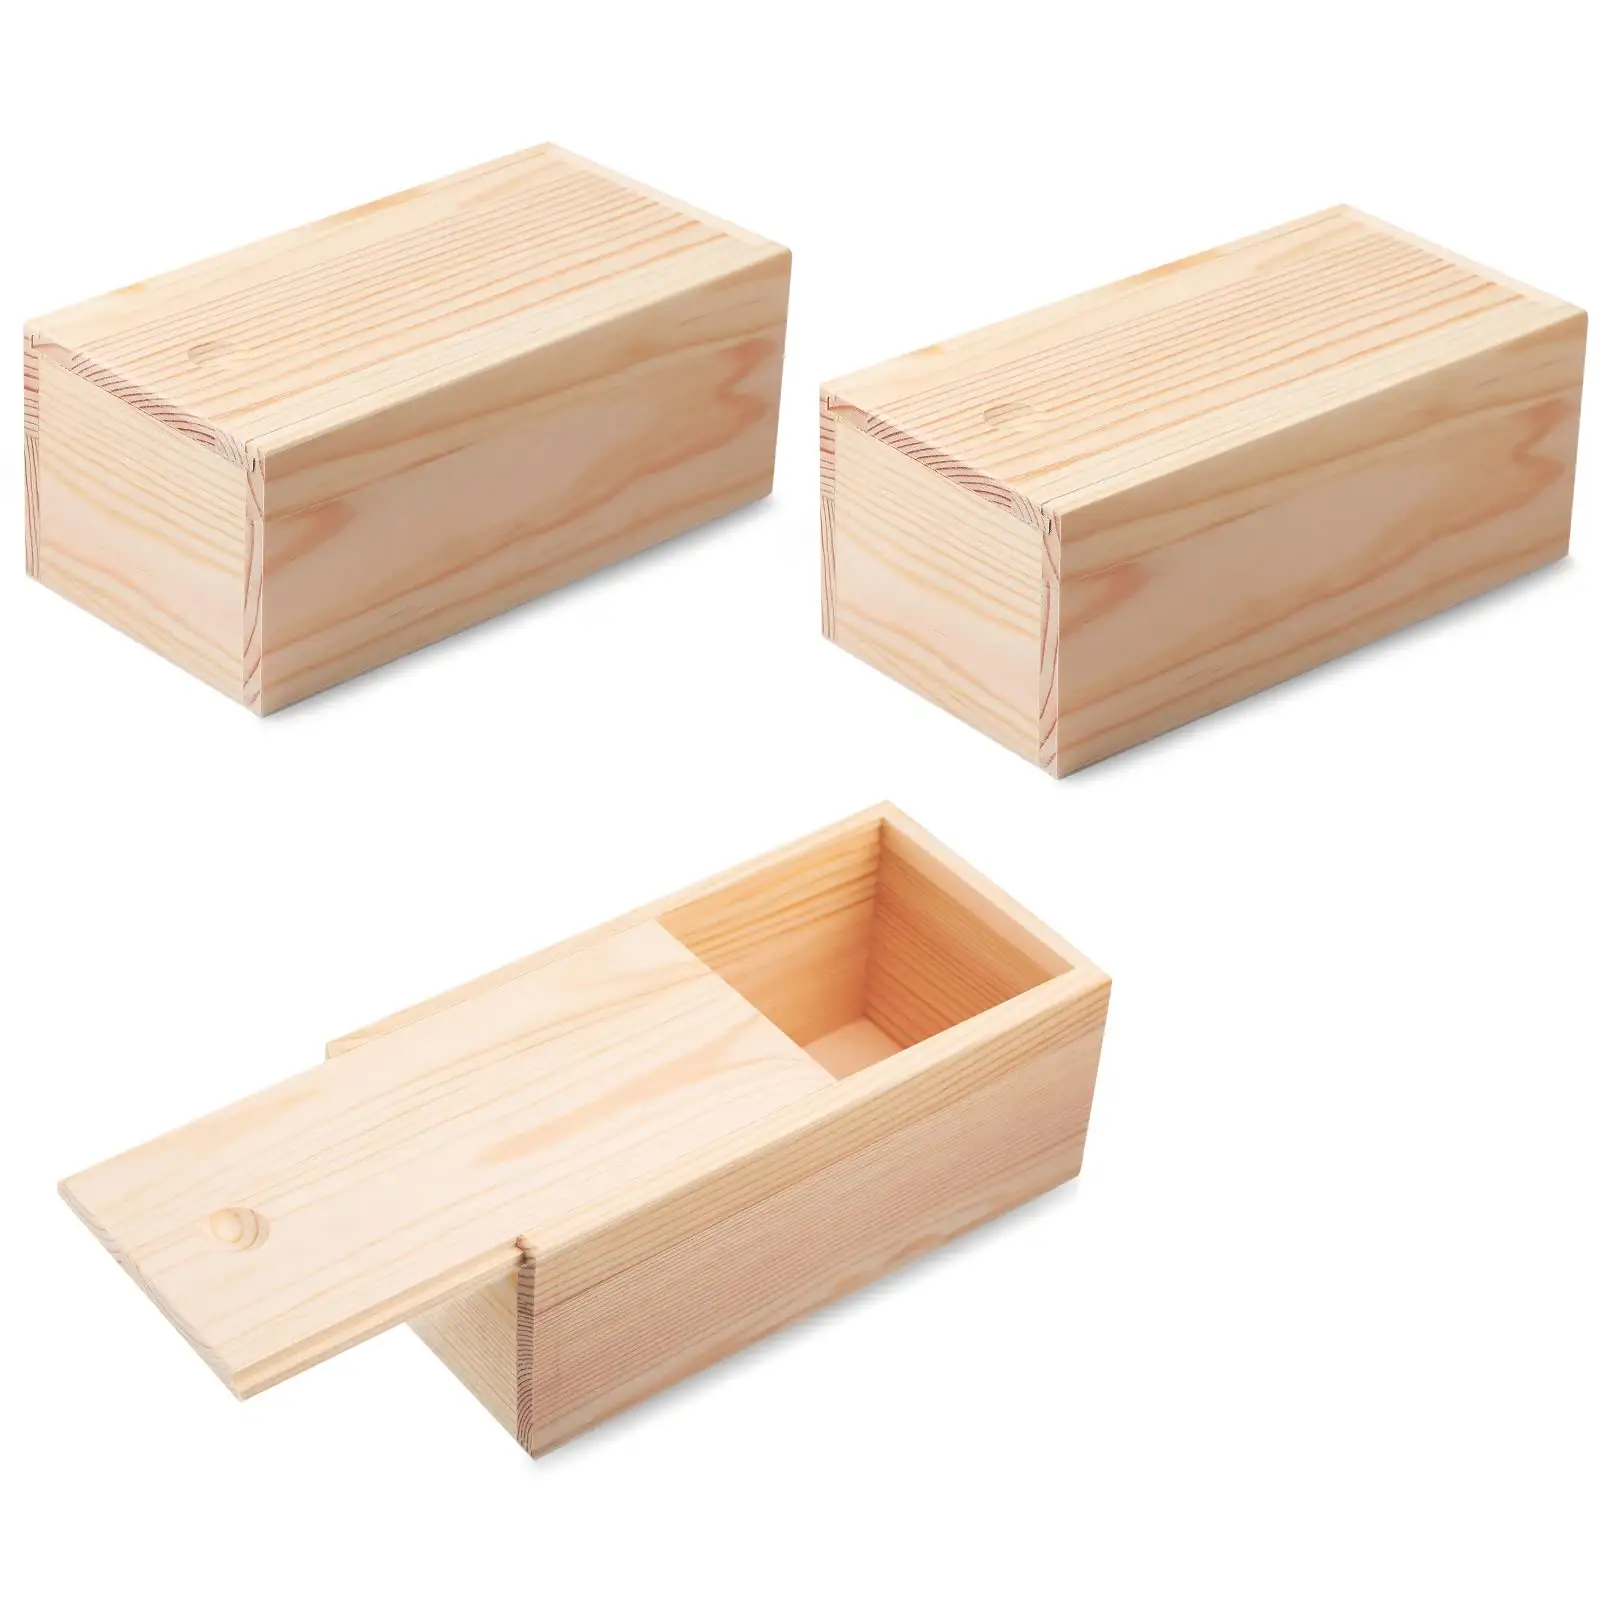 Small Wooden Storage Crates Container Empty Gift Boxes Pencil Box 3 Pieces Unfinished Wood Box with Sliding Lid